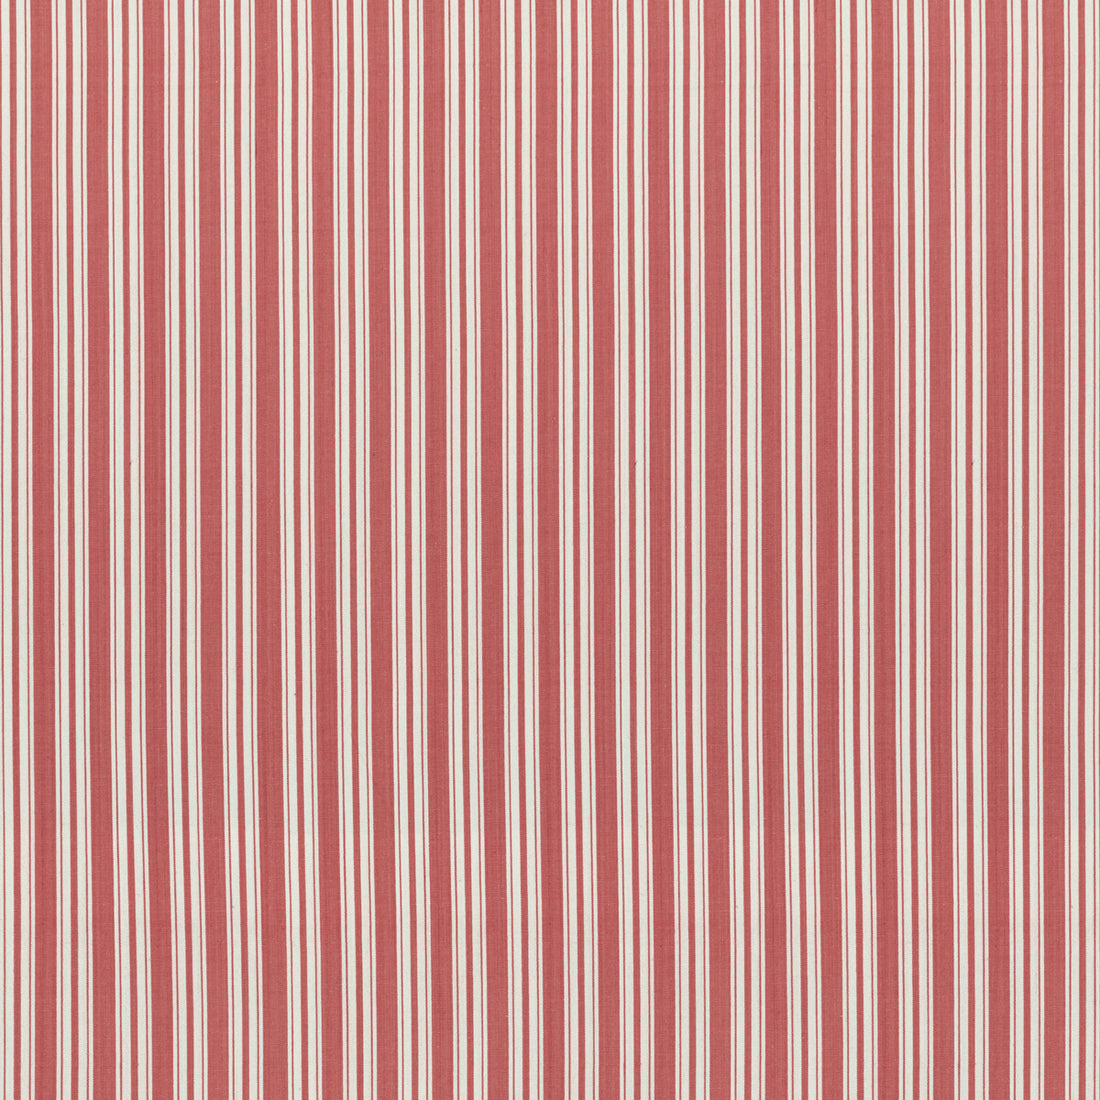 Selune Stripe fabric in red color - pattern 8022118.19.0 - by Brunschwig &amp; Fils in the Normant Checks And Stripes II collection